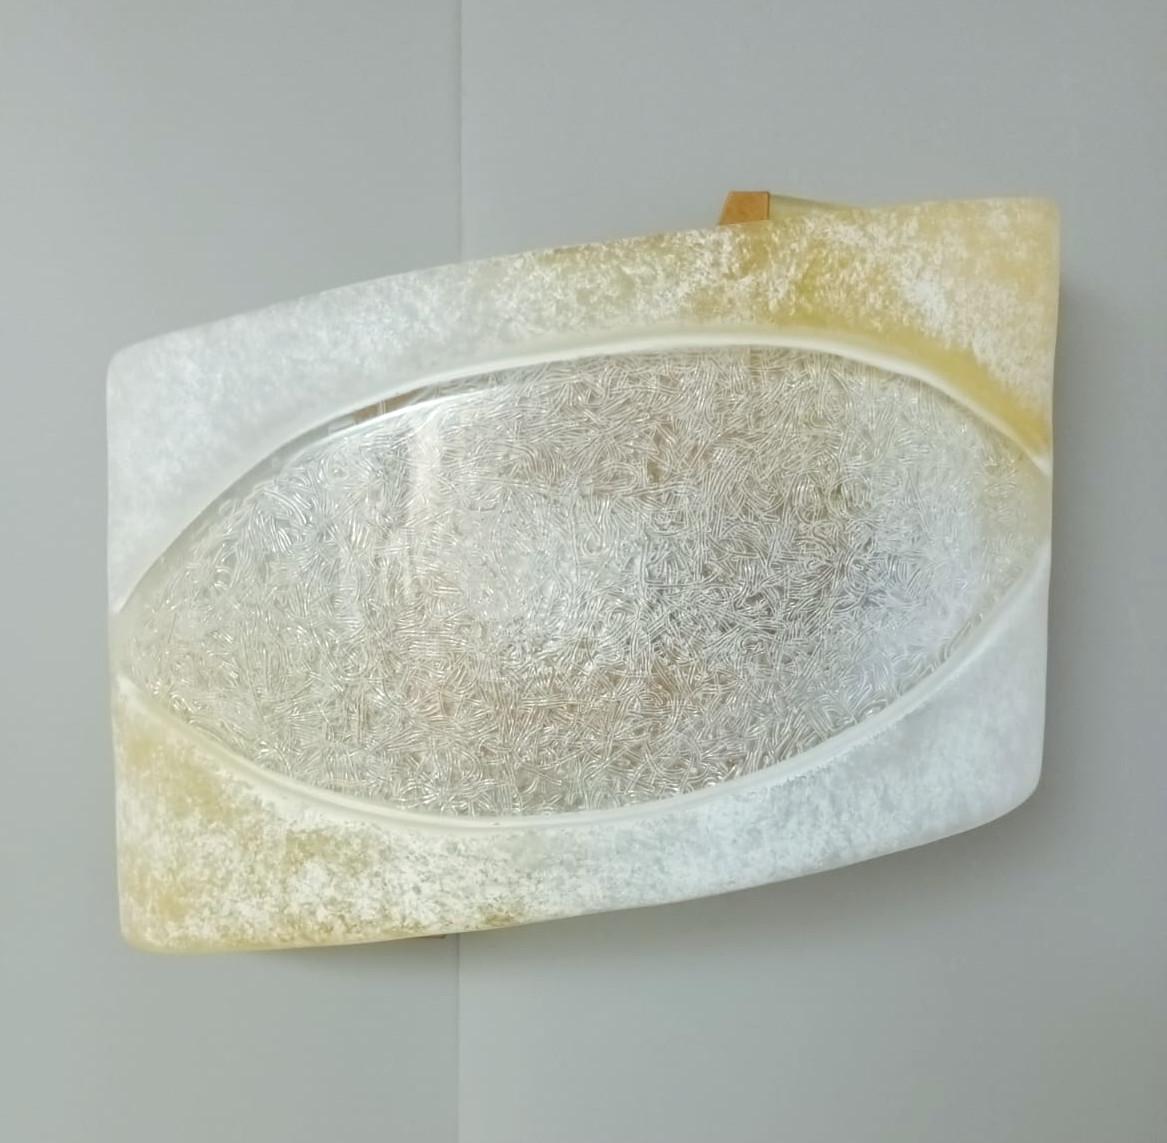 Vintage Italian Murano glass wall lights in amber and frosted white color with an 